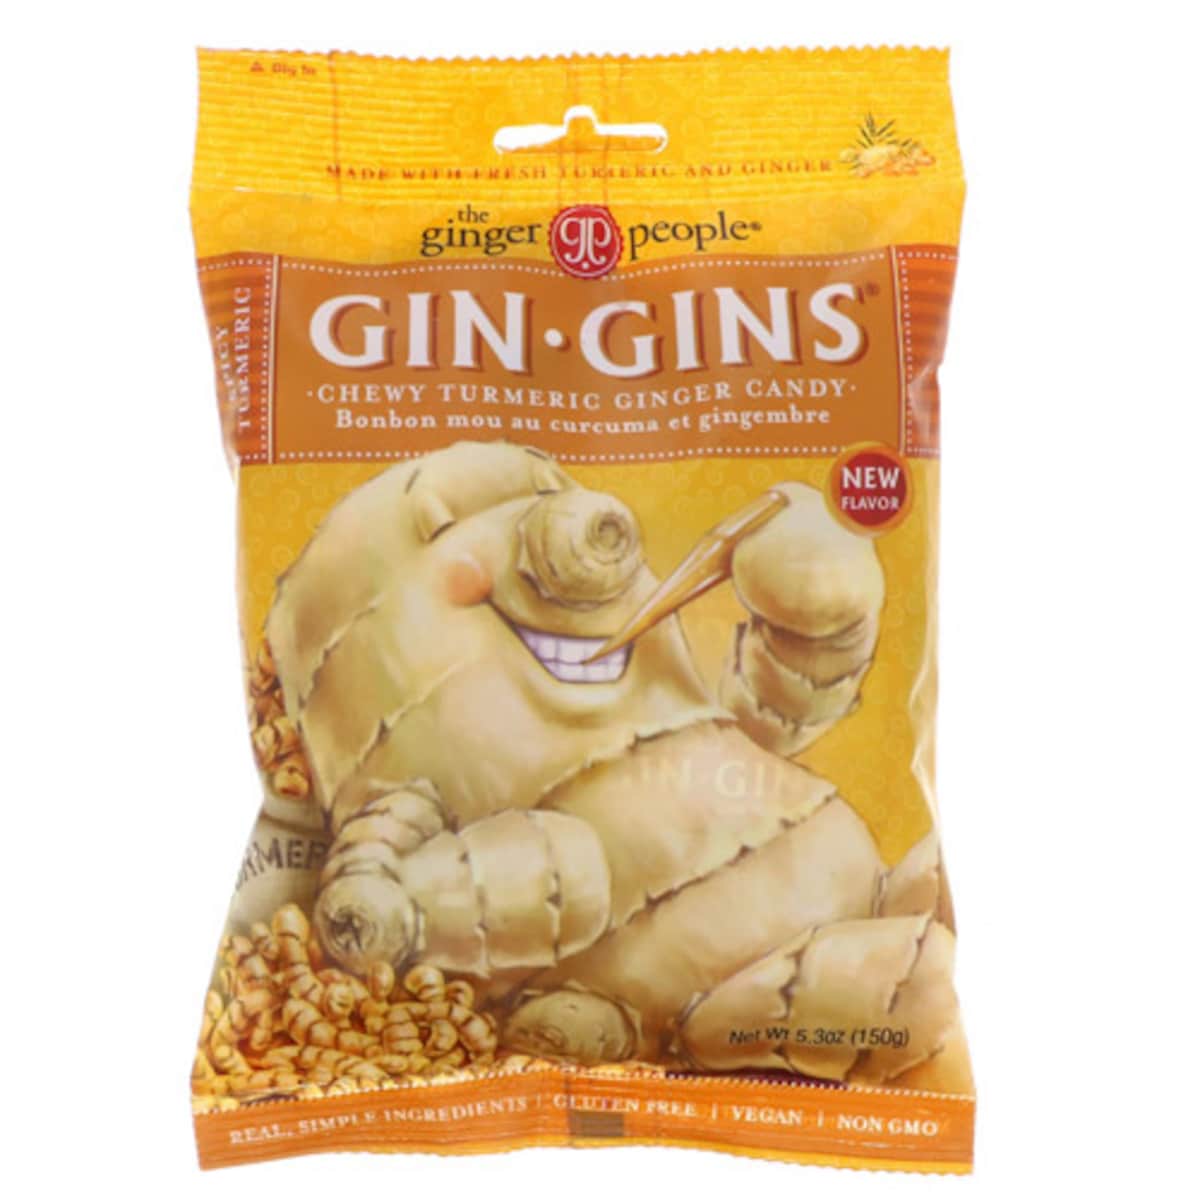 The Ginger People Gin Gins Ginger Candy Chewy Spicy Tumeric 150g